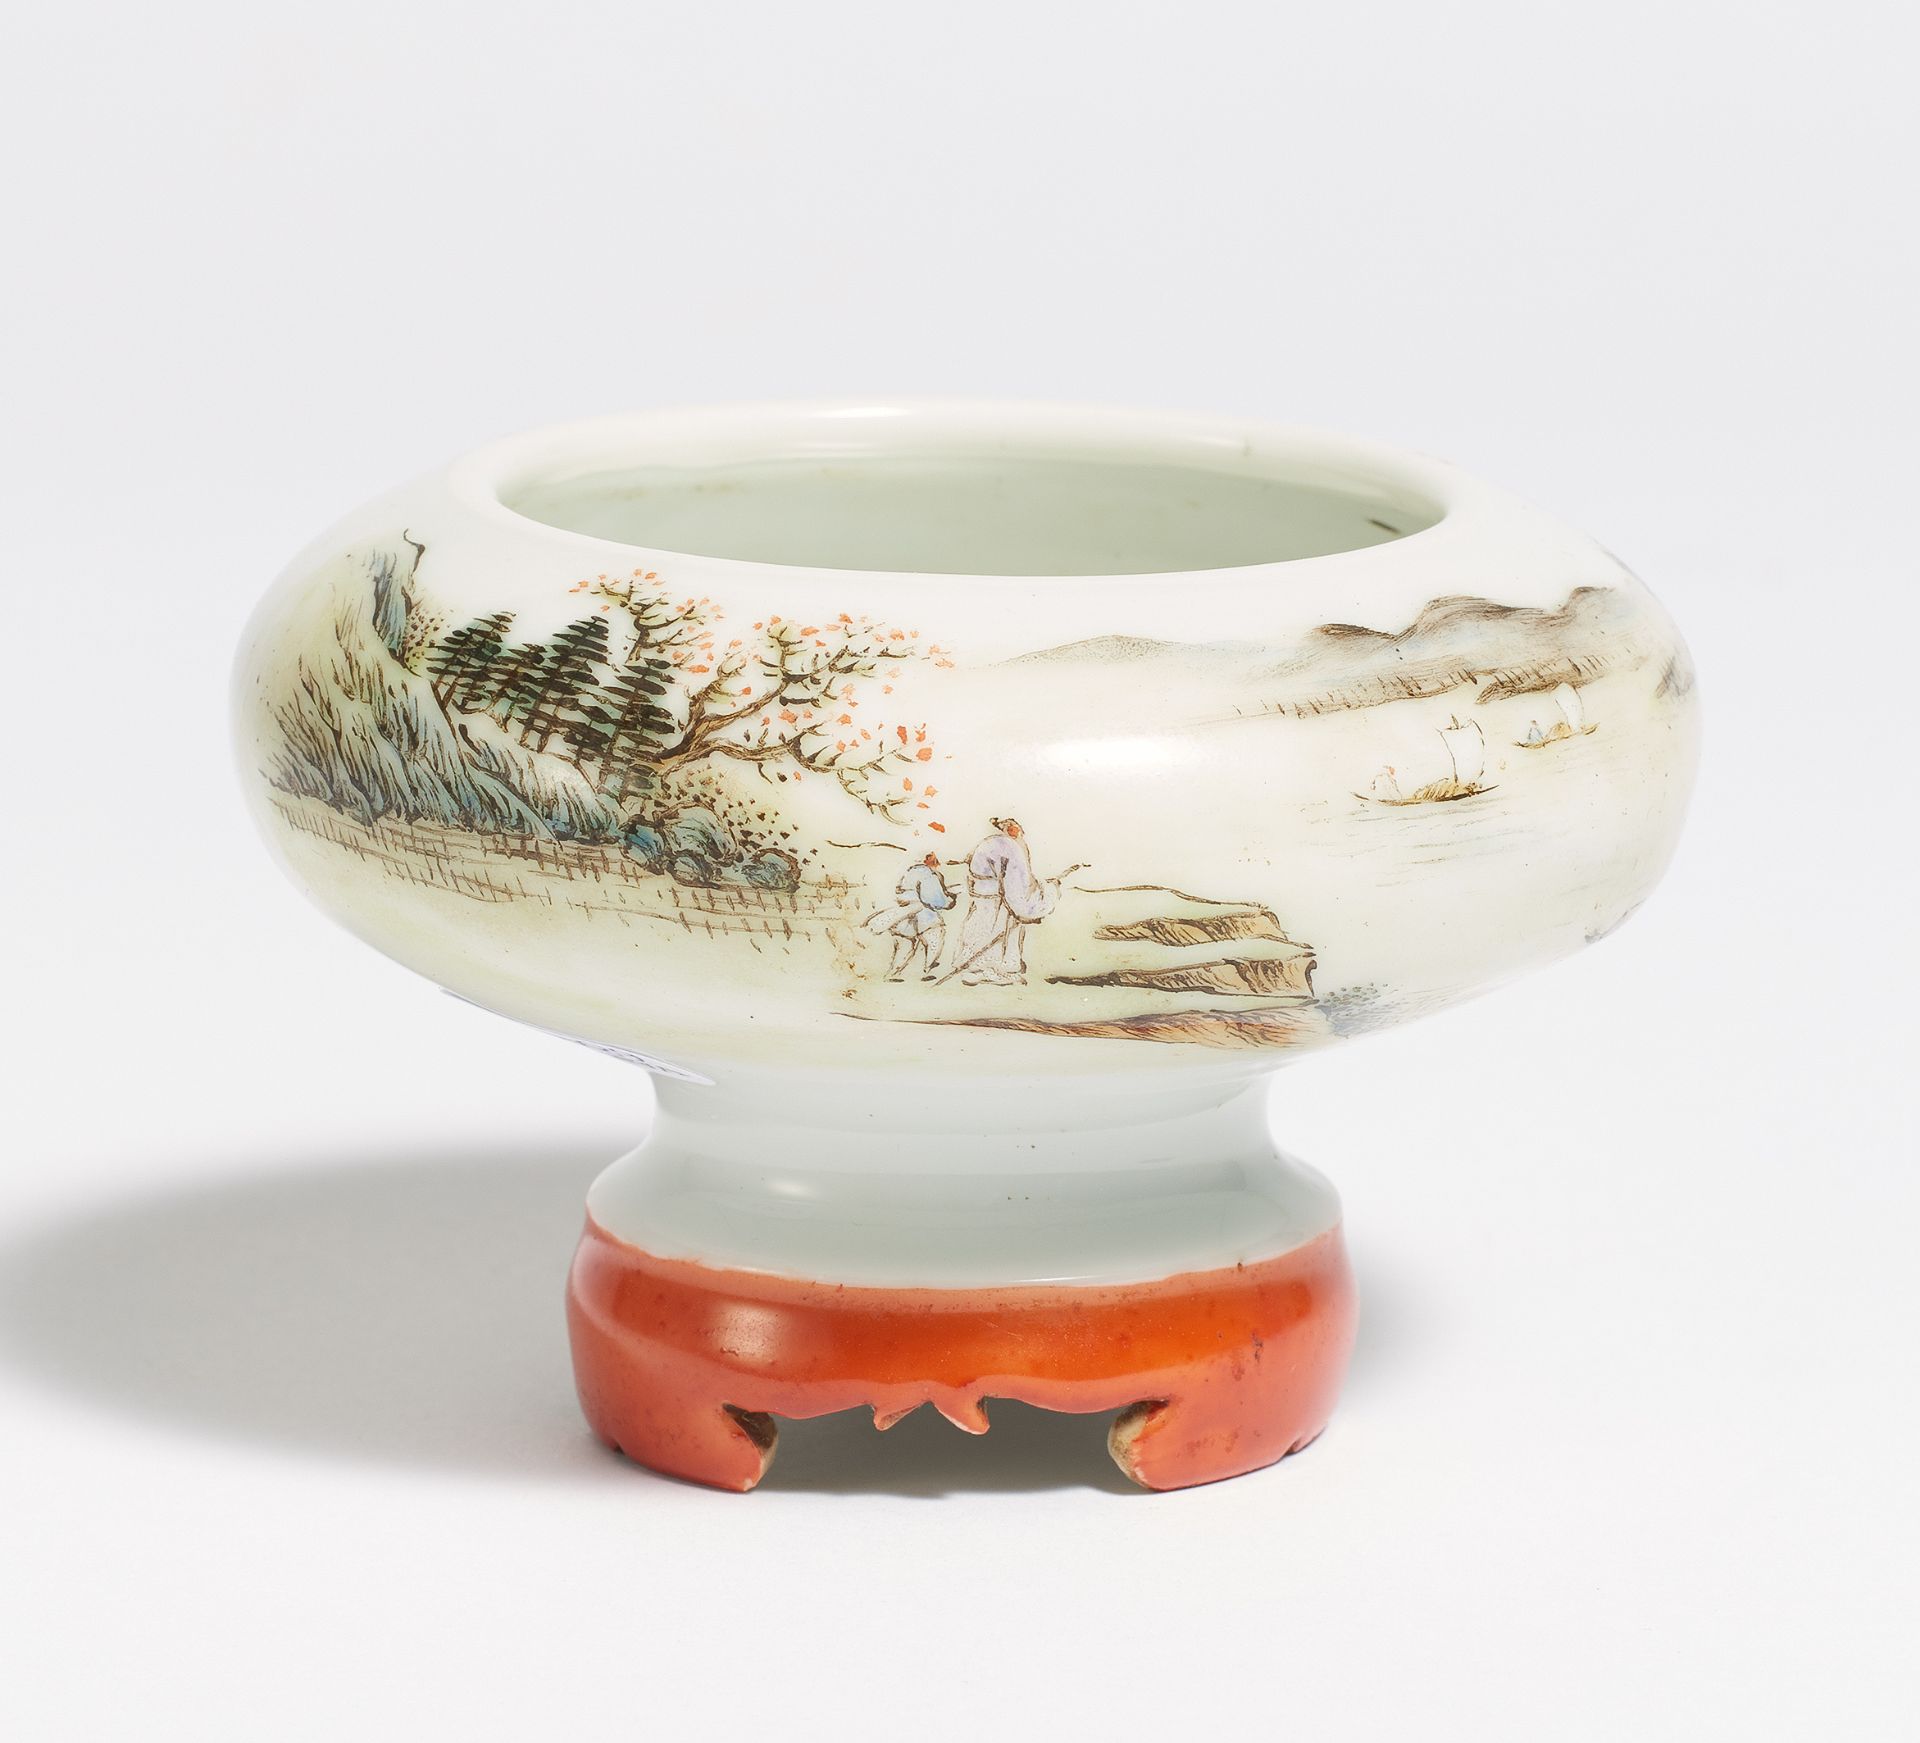 SMALL BRUSH WASHER WITH LANDSCAPE, ON A HIGH BASE. China. Republik period (1912-1949) or later. In